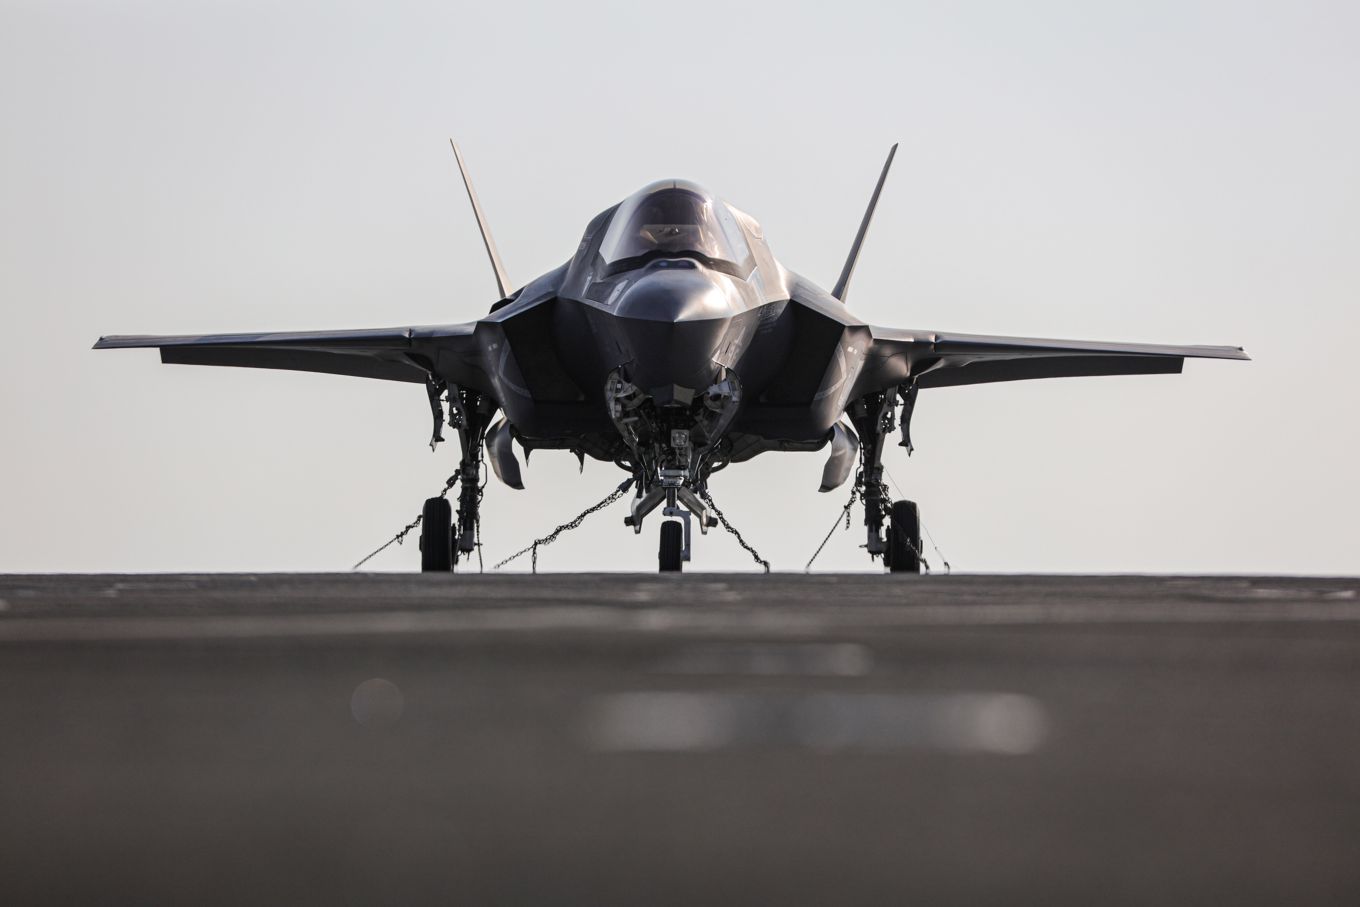 Image shows an F35 aircraft head on.